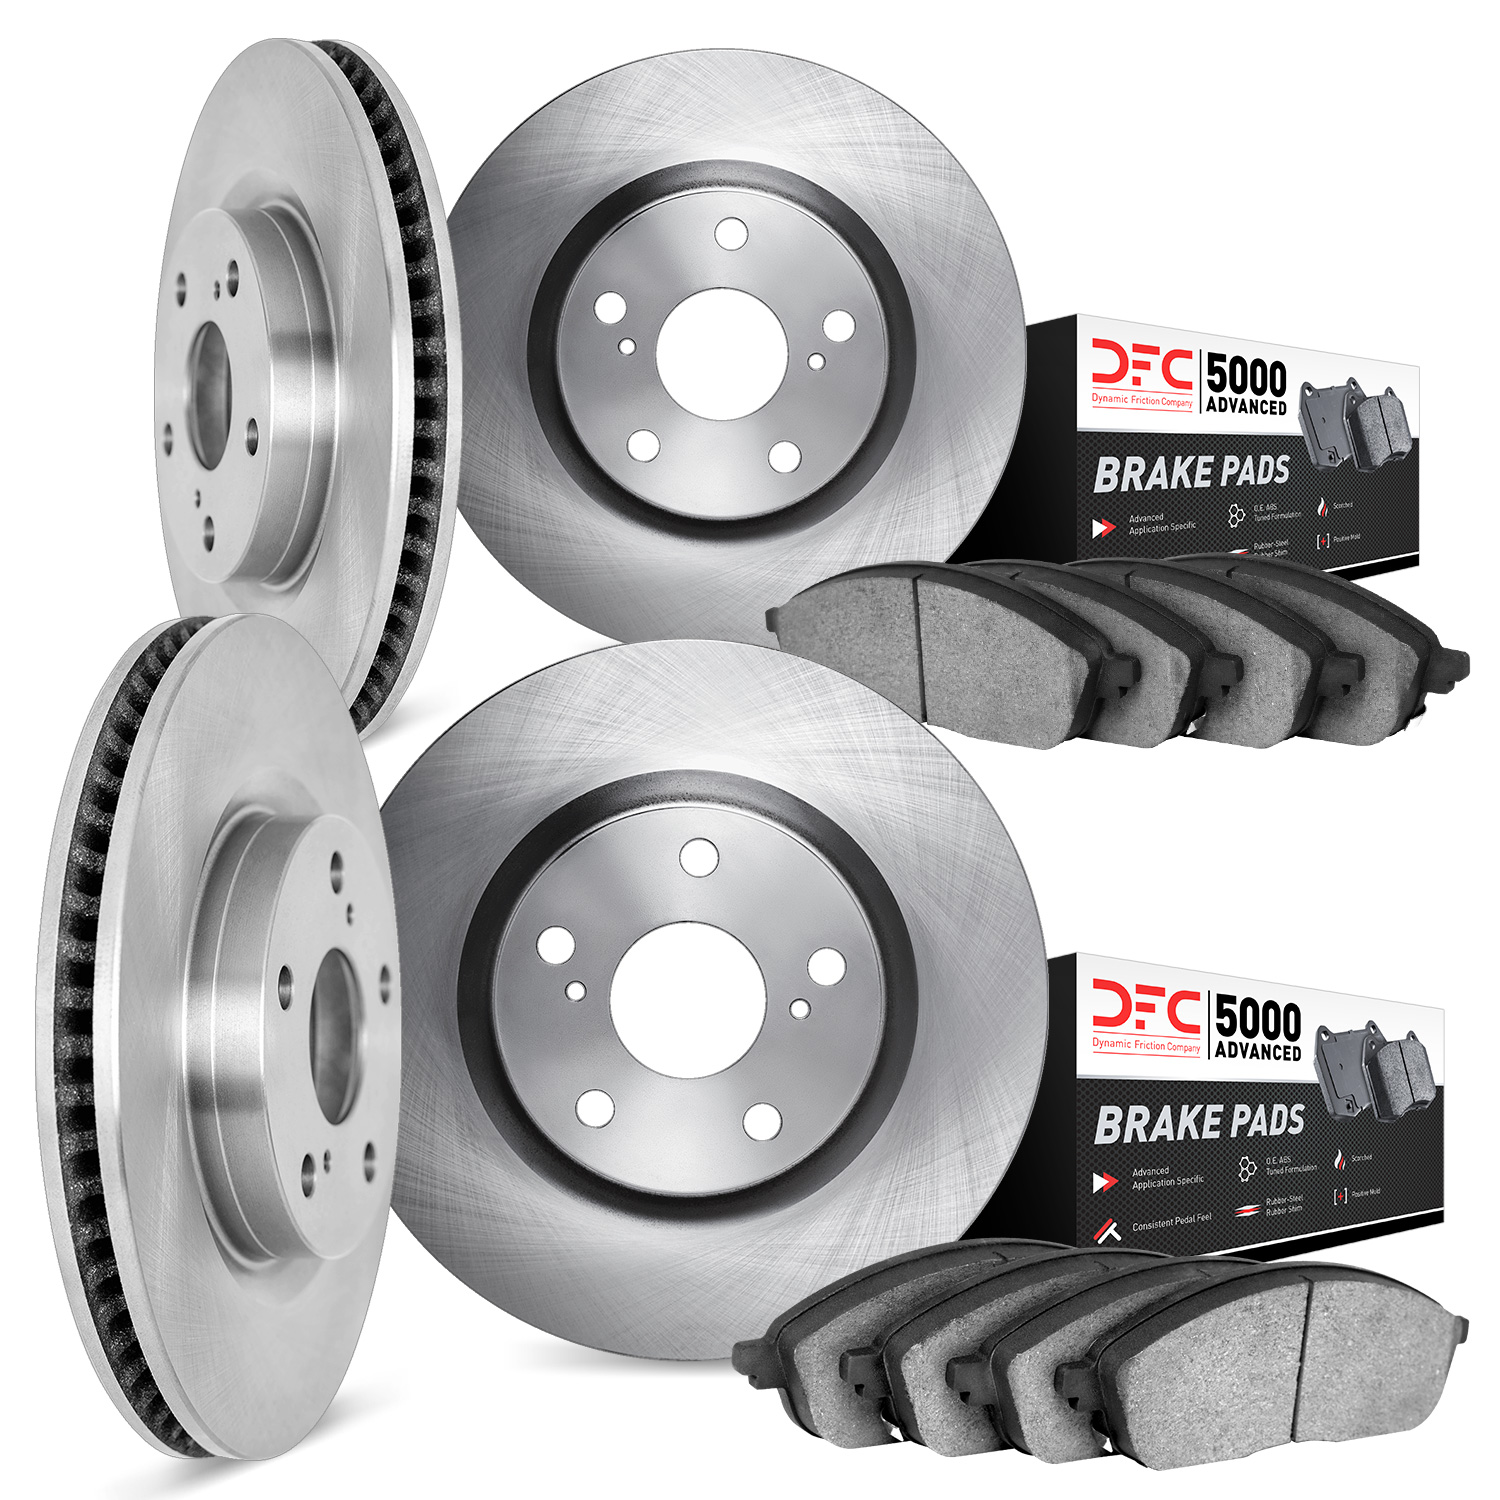 6504-31090 Brake Rotors w/5000 Advanced Brake Pads Kit, 2007-2010 BMW, Position: Front and Rear